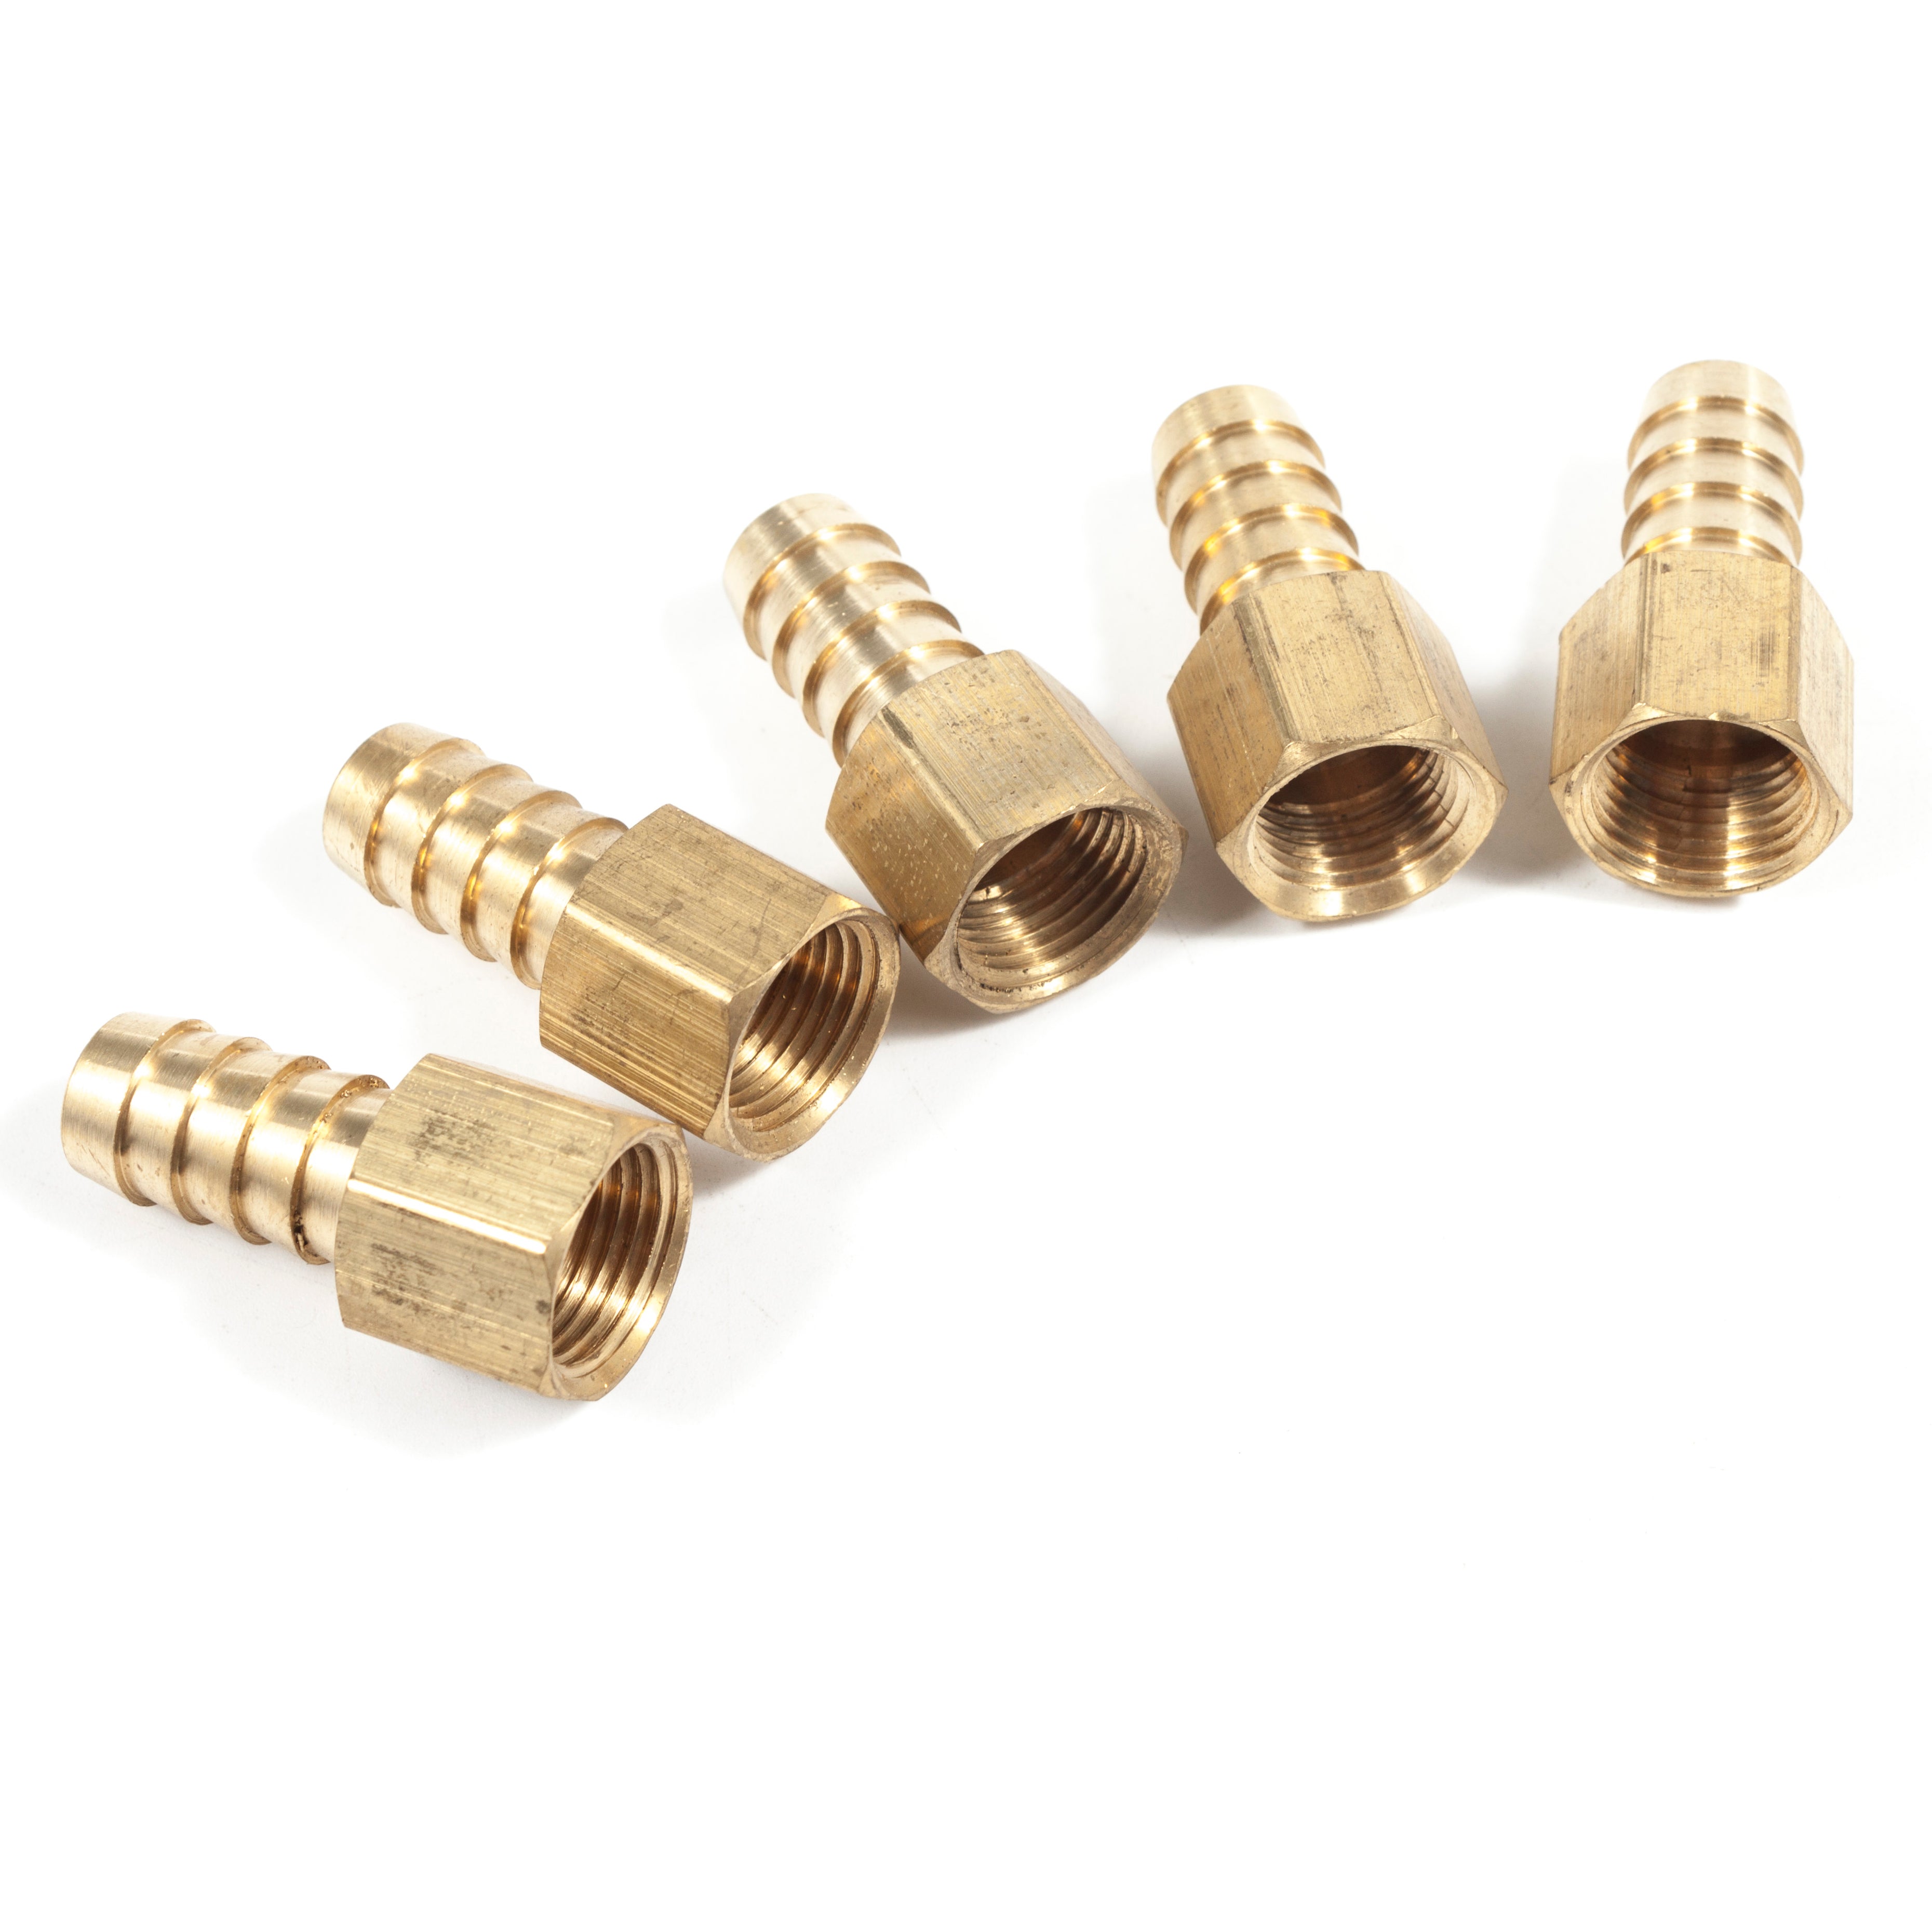 LTWFITTING Lead Free Brass Fitting Coupler/Adapter 1/2 Inch Hose Barb x 3/8 Inch Female NPT Fuel Gas Water (Pack of 5)